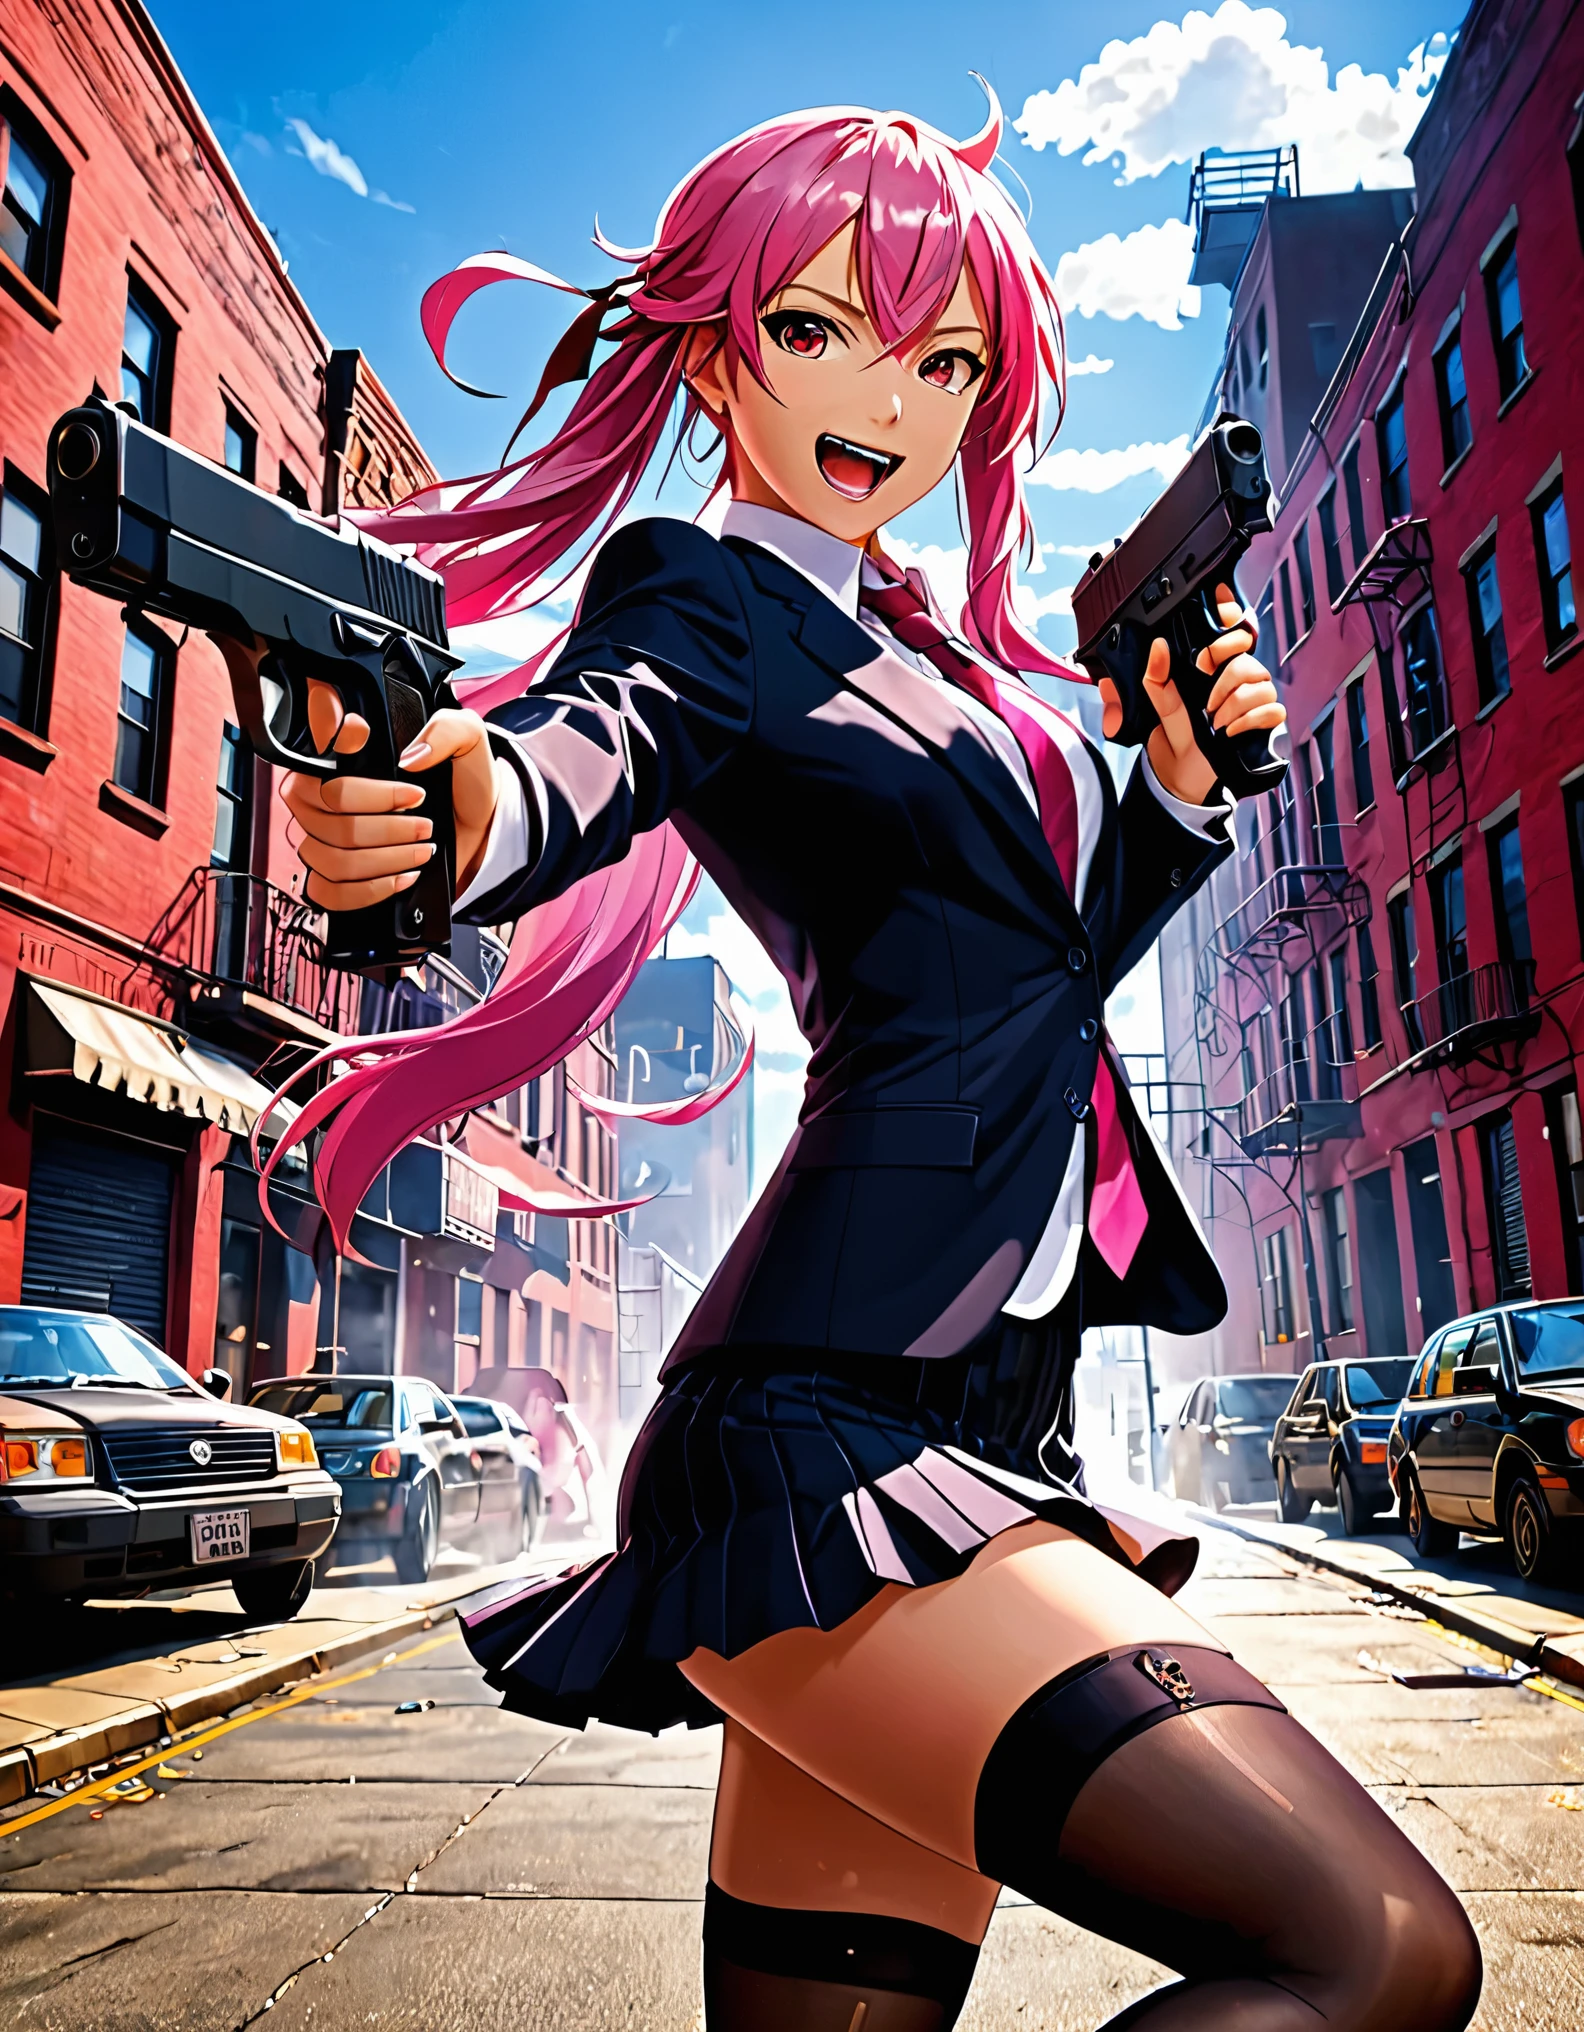 (better lighting, high contrast, sharp details), (a person:1.2+female) Gasai_yuno,laughing,blush, gangster, black suit and tie, White shirt, black skirt, polished black shoes, standing, dynamic action pose, holding two guns, Beretta 92, flash, Bullet shells, gun smoke, bullet holes, Pointing at the viewer, pink fur largo, pink fur, Long hair, groomed hair, cat ears, 28 years, intense action, Brooklyn, high end apartment backdrop, vivid colors, high saturation, dramatic shadows.